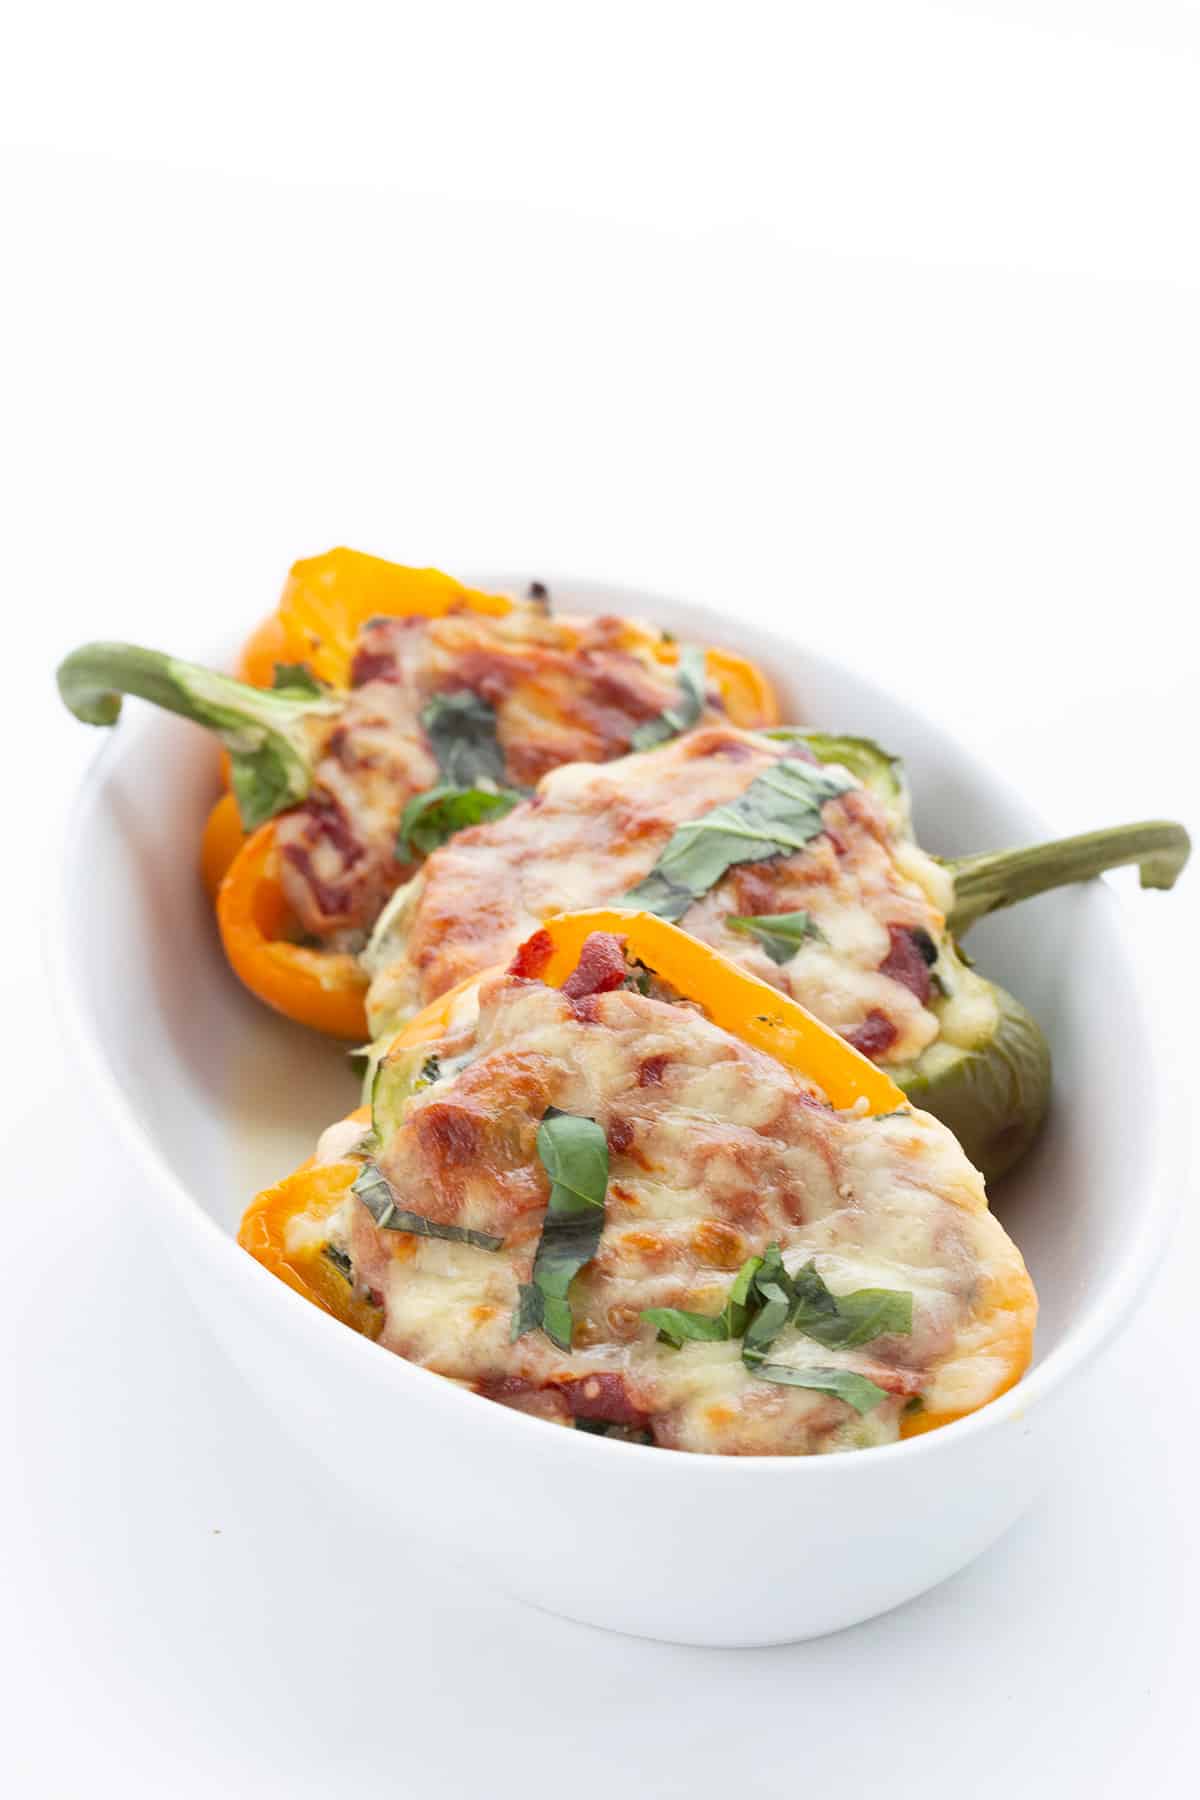 Keto stuffed peppers in a white ceramic baking dish.